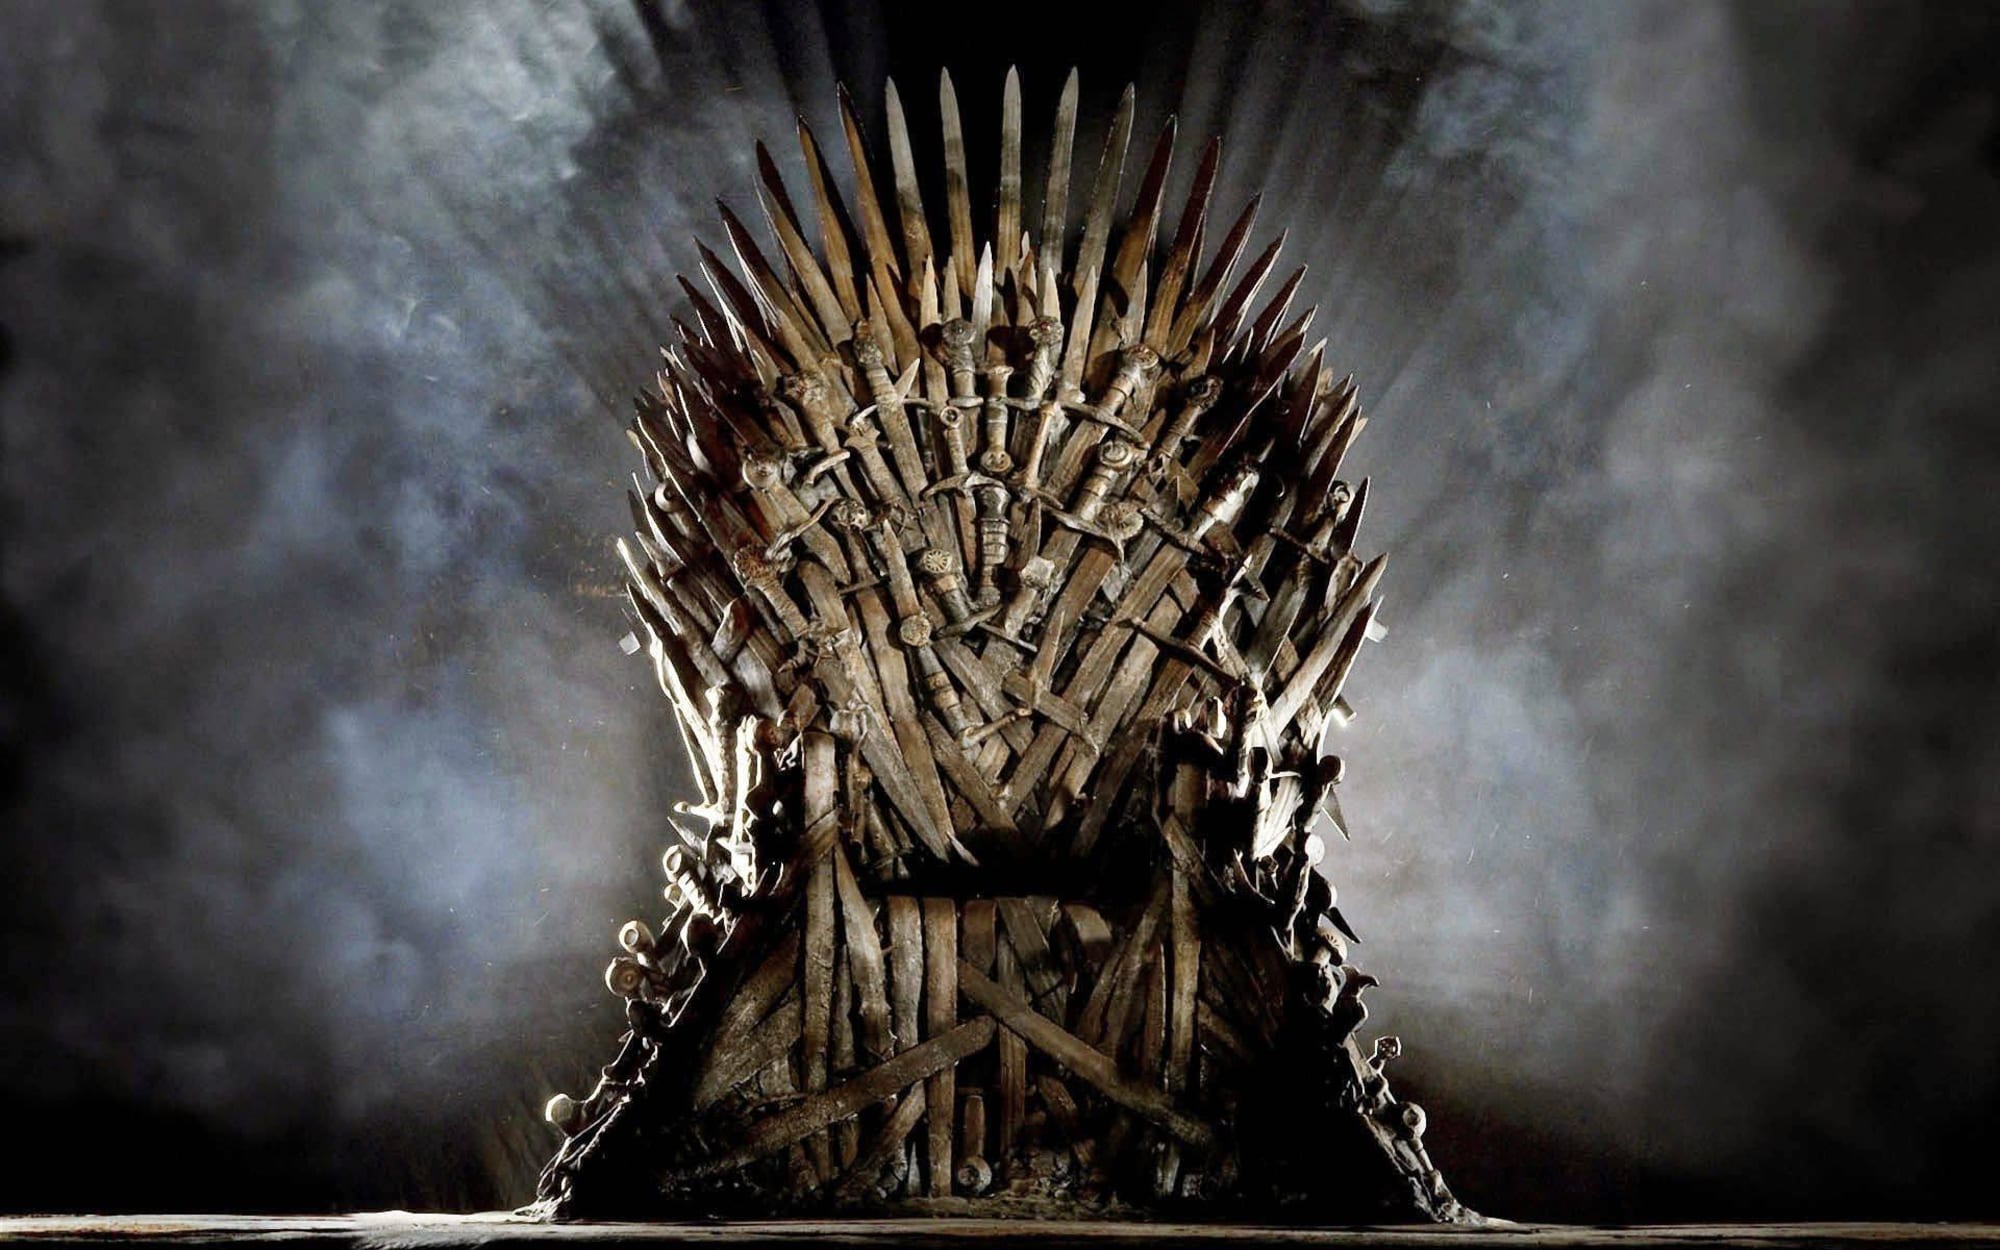 Game of Thrones symbology: What is the significance of the Iron Throne?